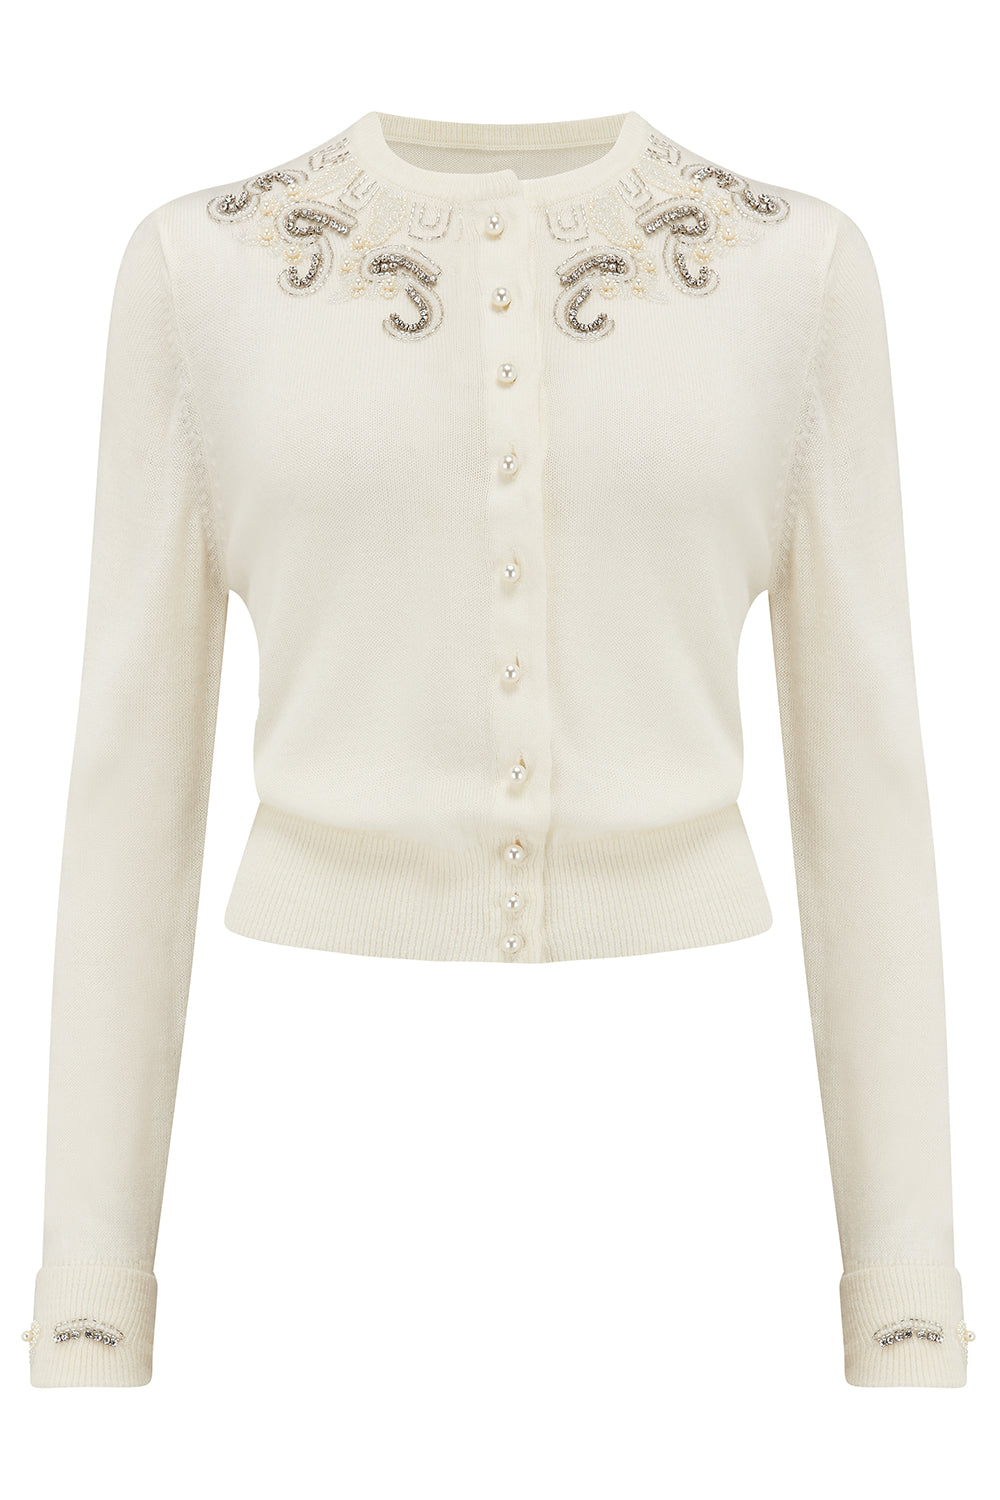 The Beaded Cardigan in Cream, Stunning 1940s Vintage Style - True and authentic vintage style clothing, inspired by the Classic styles of CC41 , WW2 and the fun 1950s RocknRoll era, for everyday wear plus events like Goodwood Revival, Twinwood Festival and Viva Las Vegas Rockabilly Weekend Rock n Romance The Seamstress Of Bloomsbury